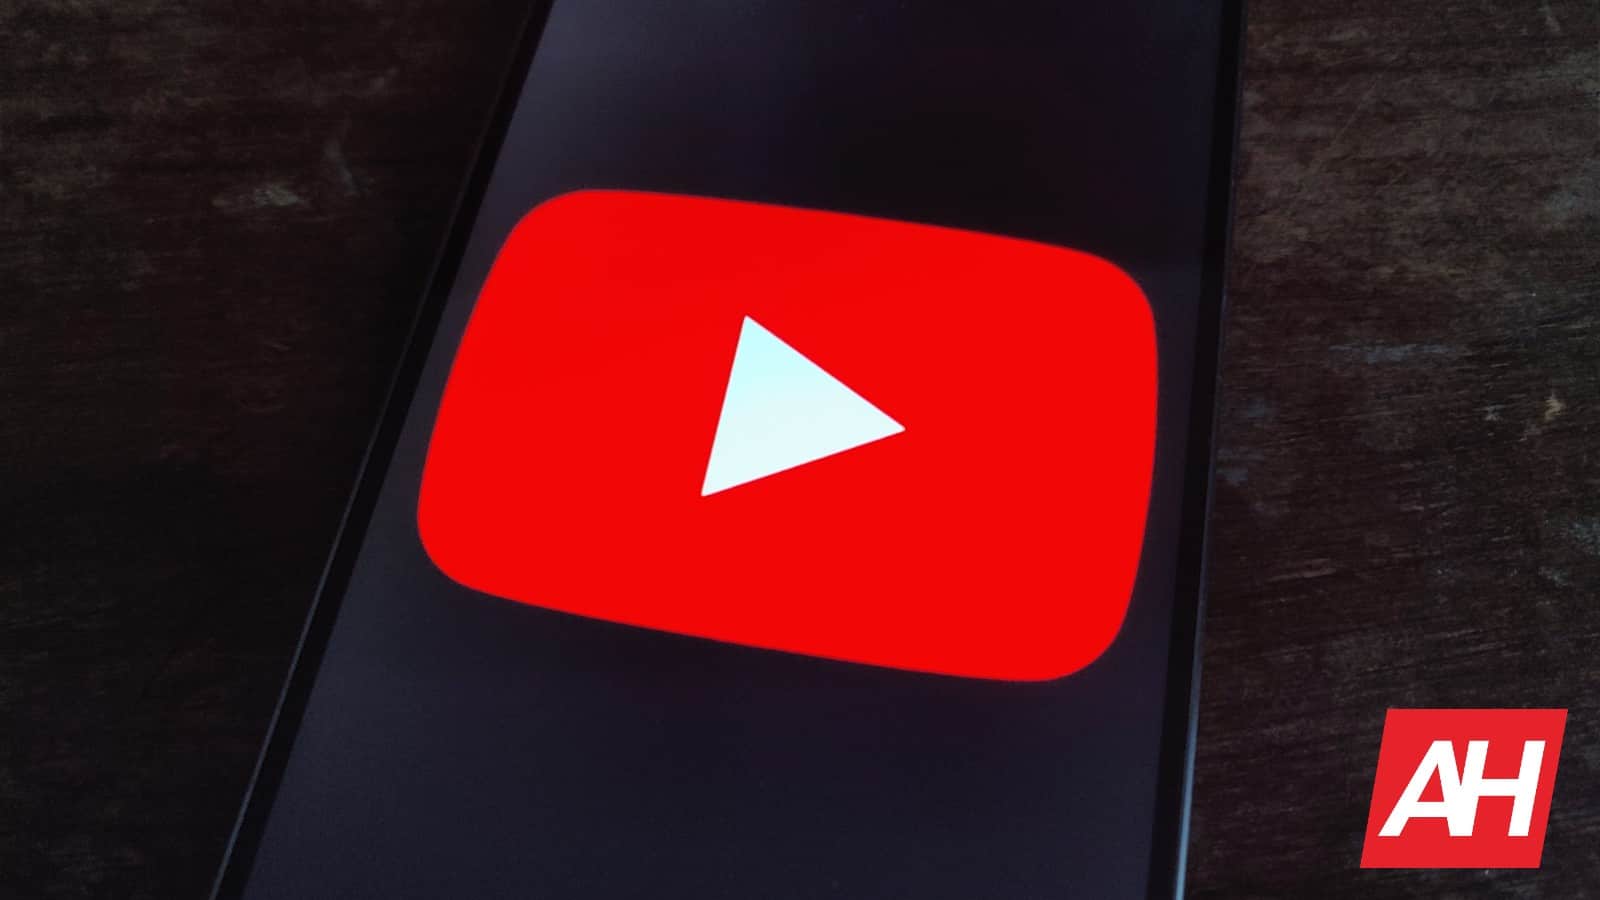 YouTube will strengthen enforcement on third-party ad-blocking apps